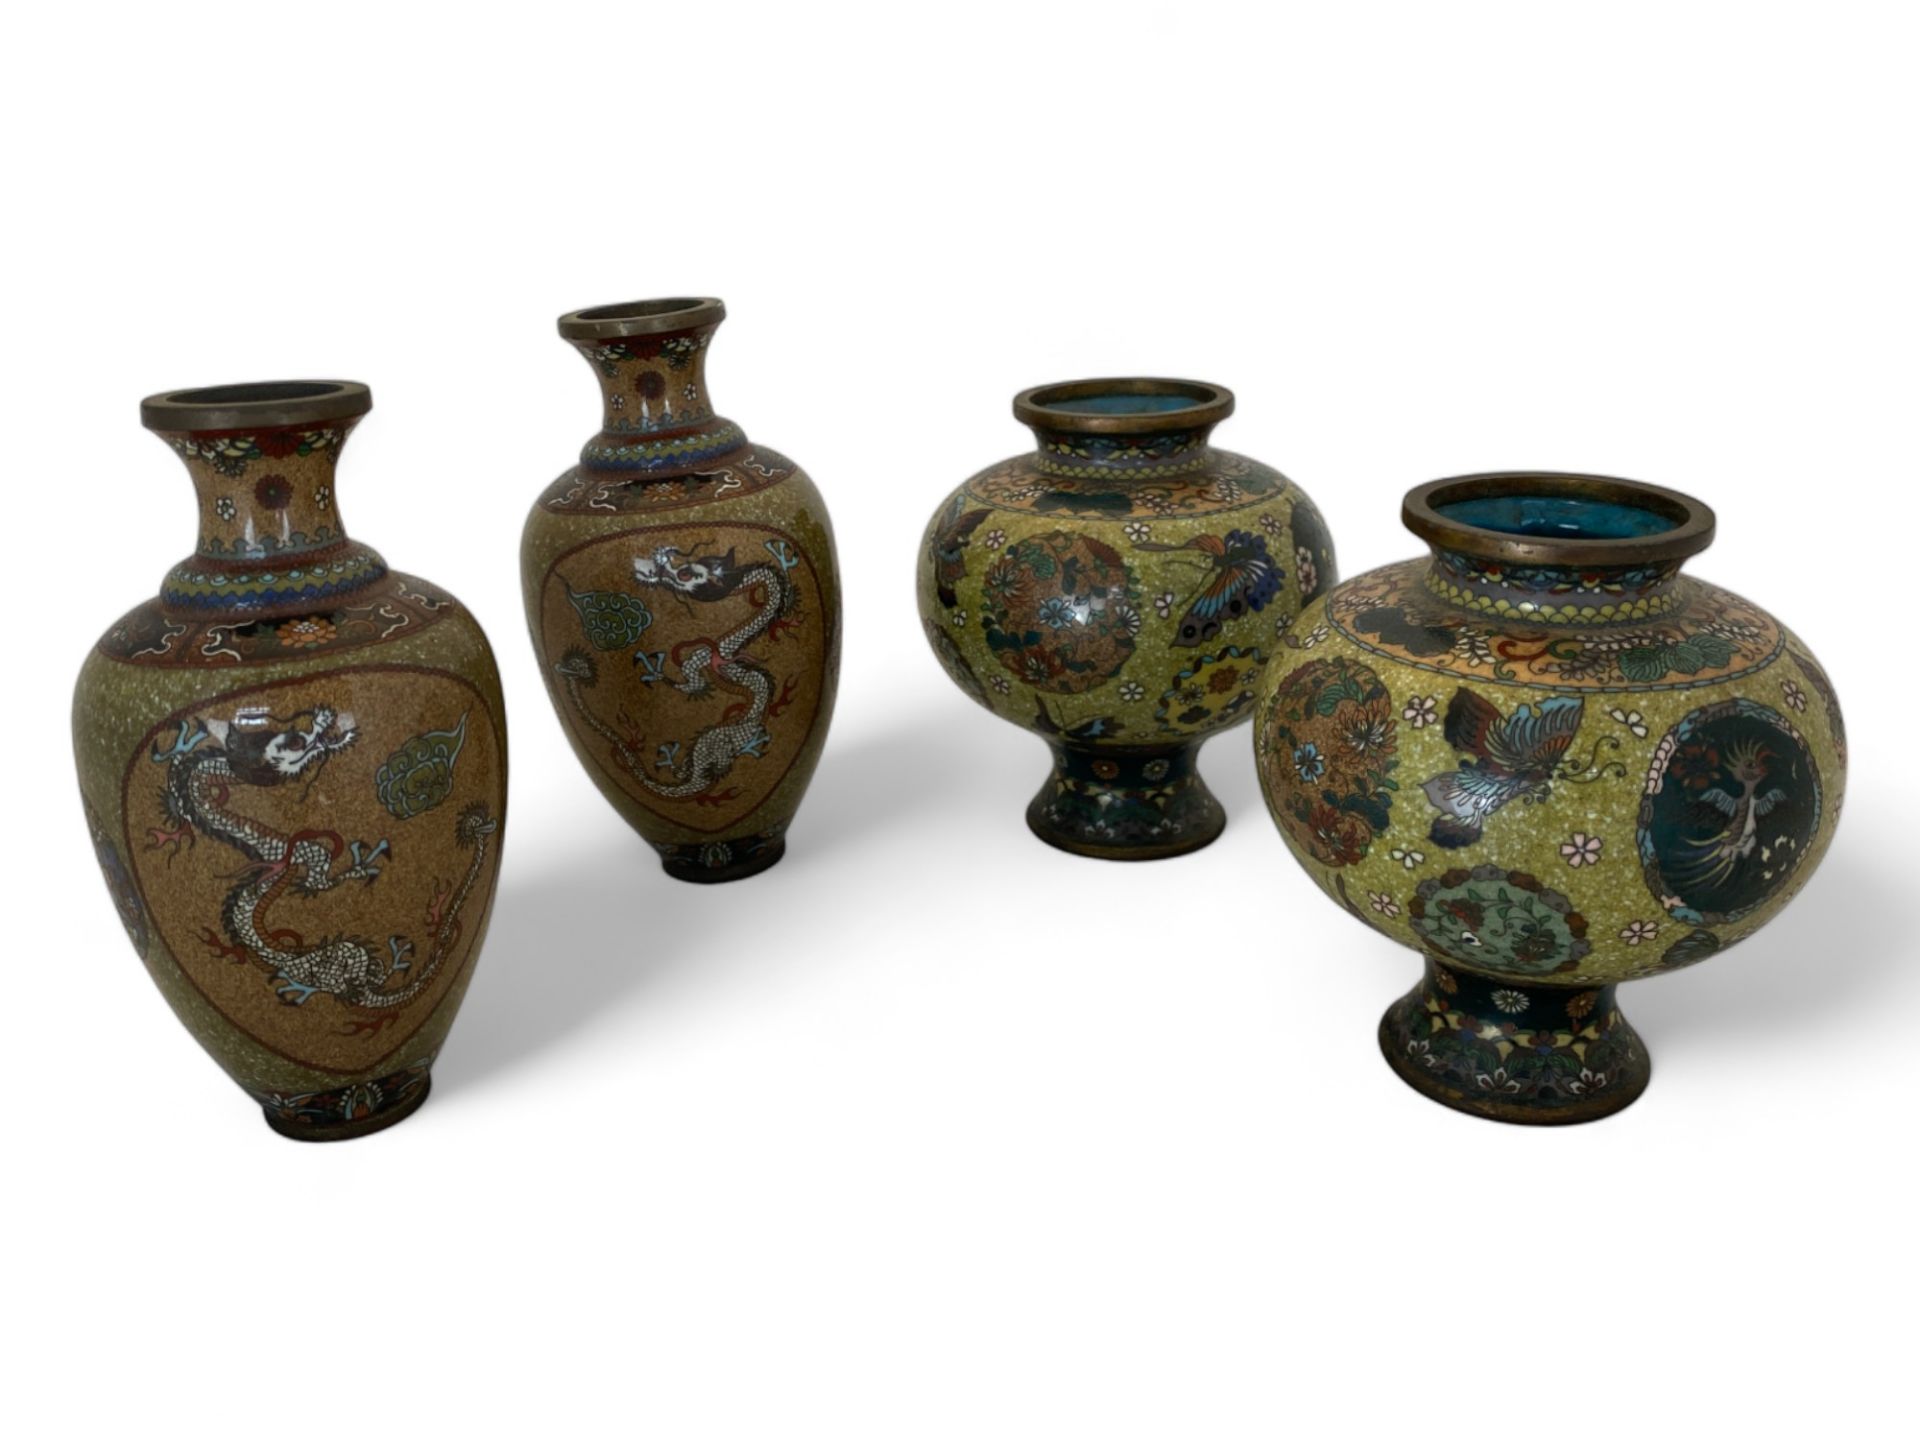 Two pairs of late 19th/early 20th century small cloisonné vases - Image 3 of 5